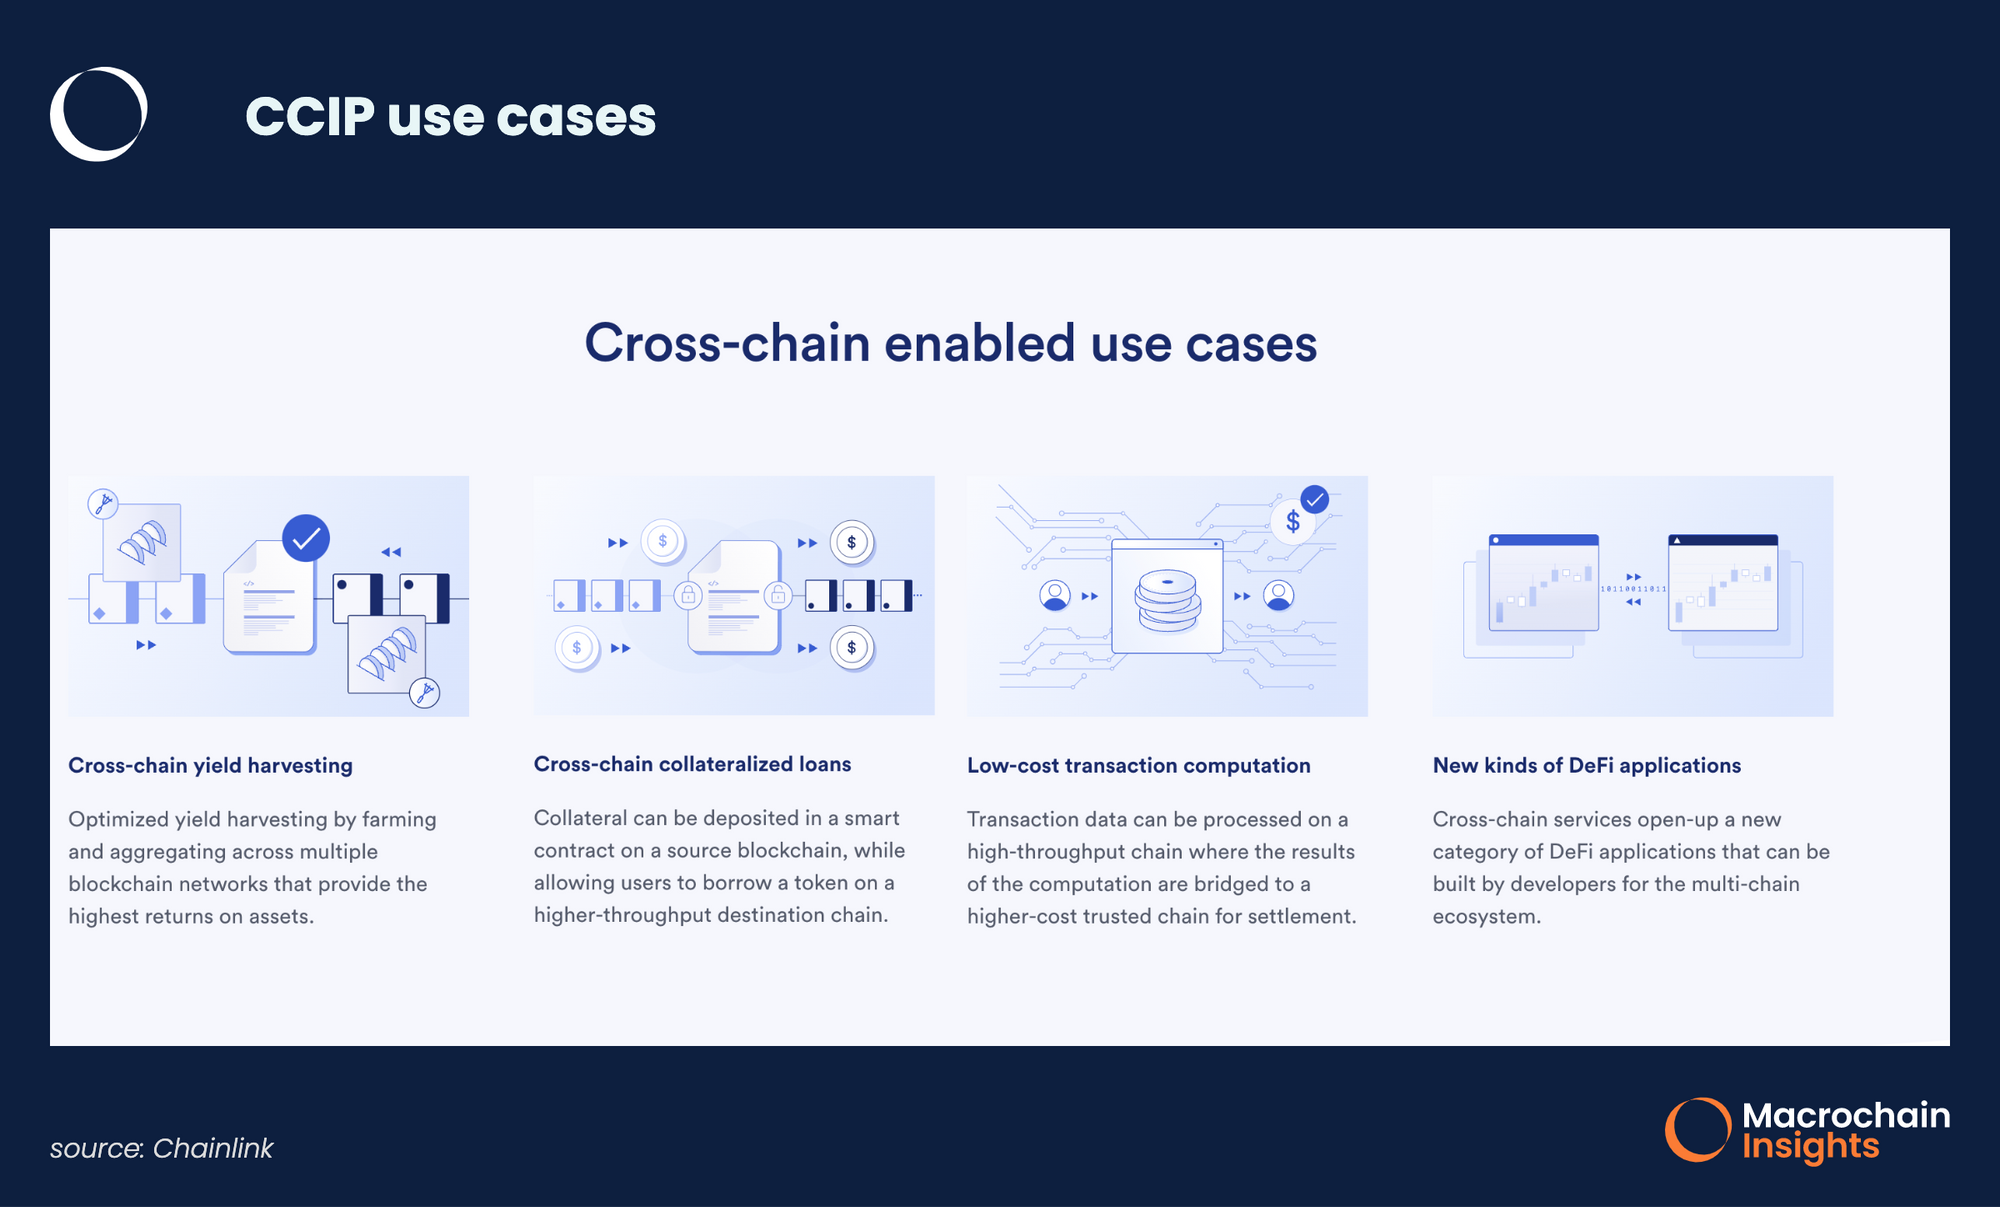 Chainlink CCIP Use Cases